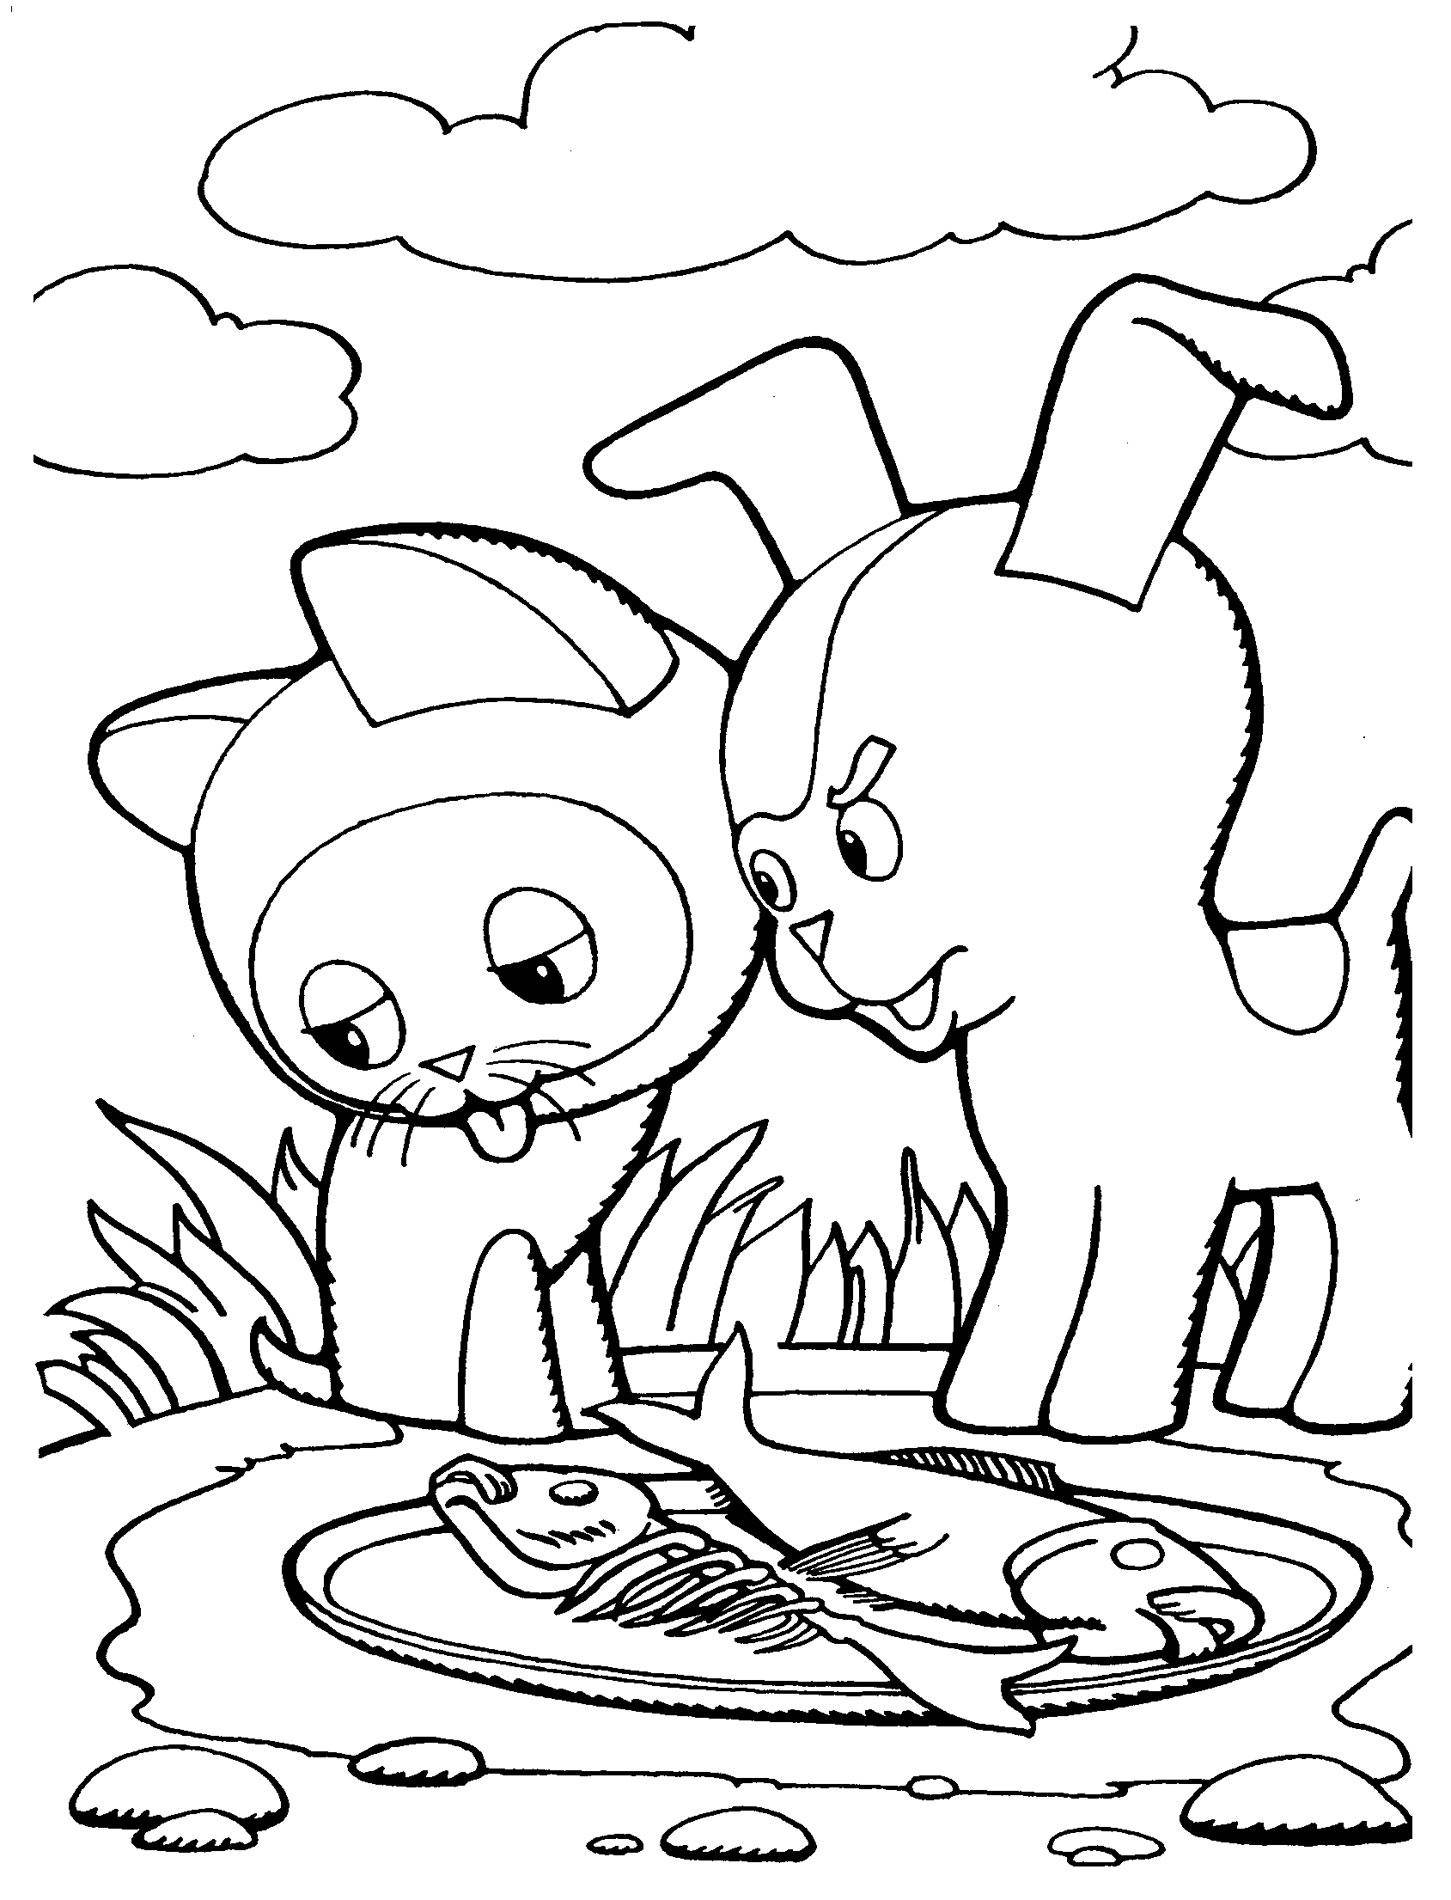 Coloring Drawing kitten named woof and fish. Category Pets allowed. Tags:  cat, cat.